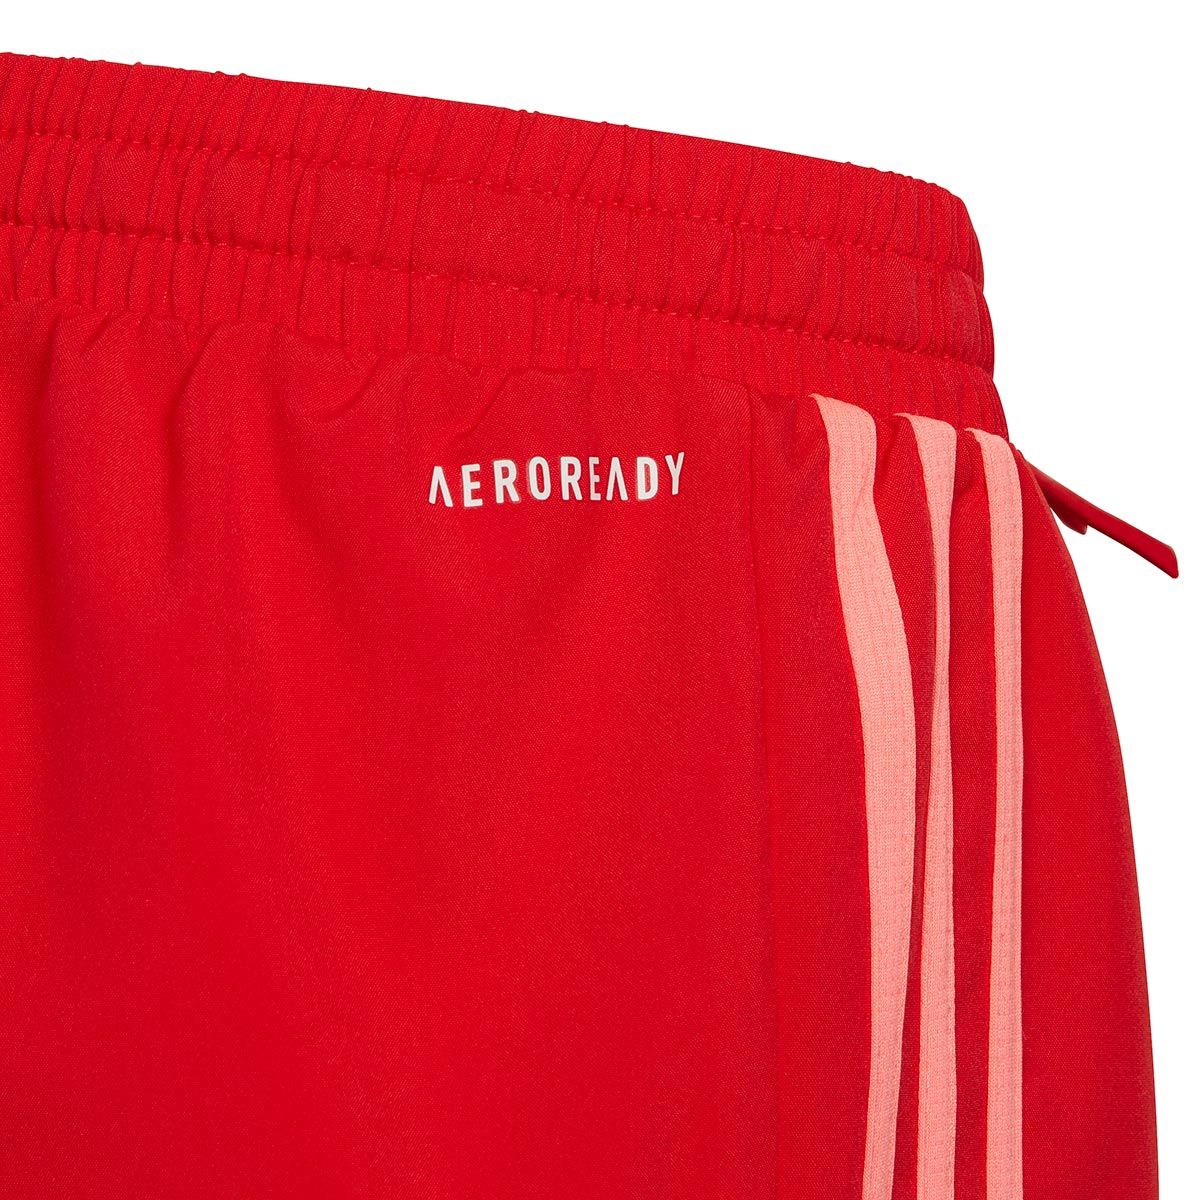 adidas Designed To Move 3 Stripes Girl's Shorts HE2014